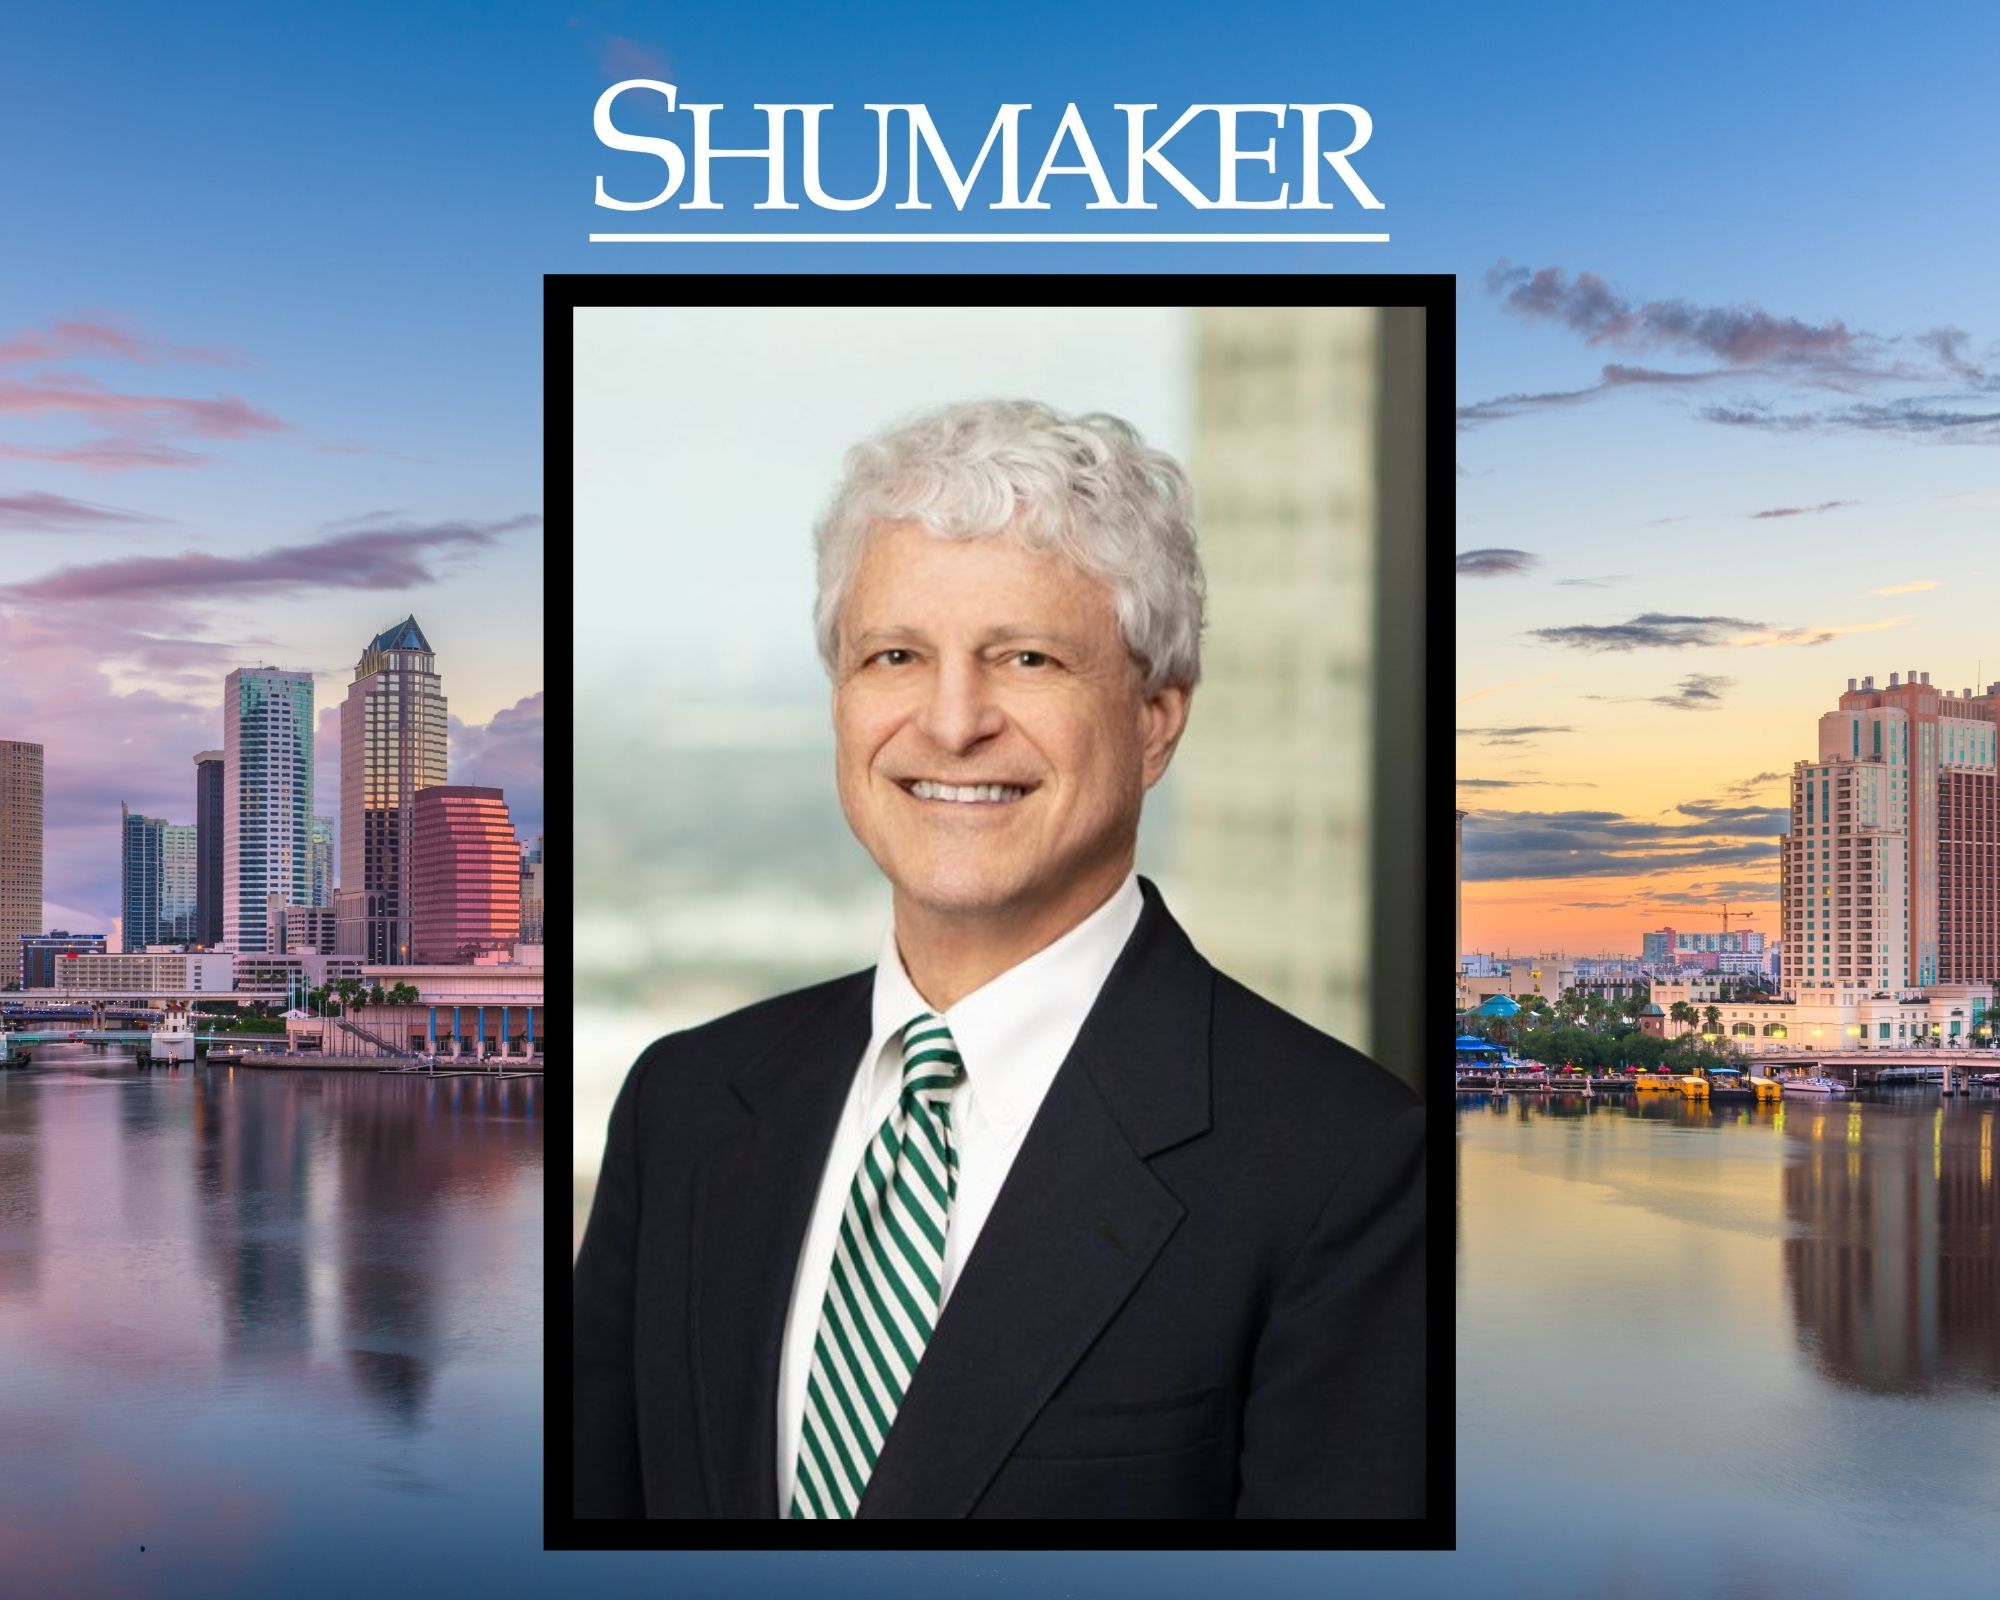 Shumaker Attorney Gregory C. Yadley Presents at the American Bar Association Business Law Section Annual Meeting